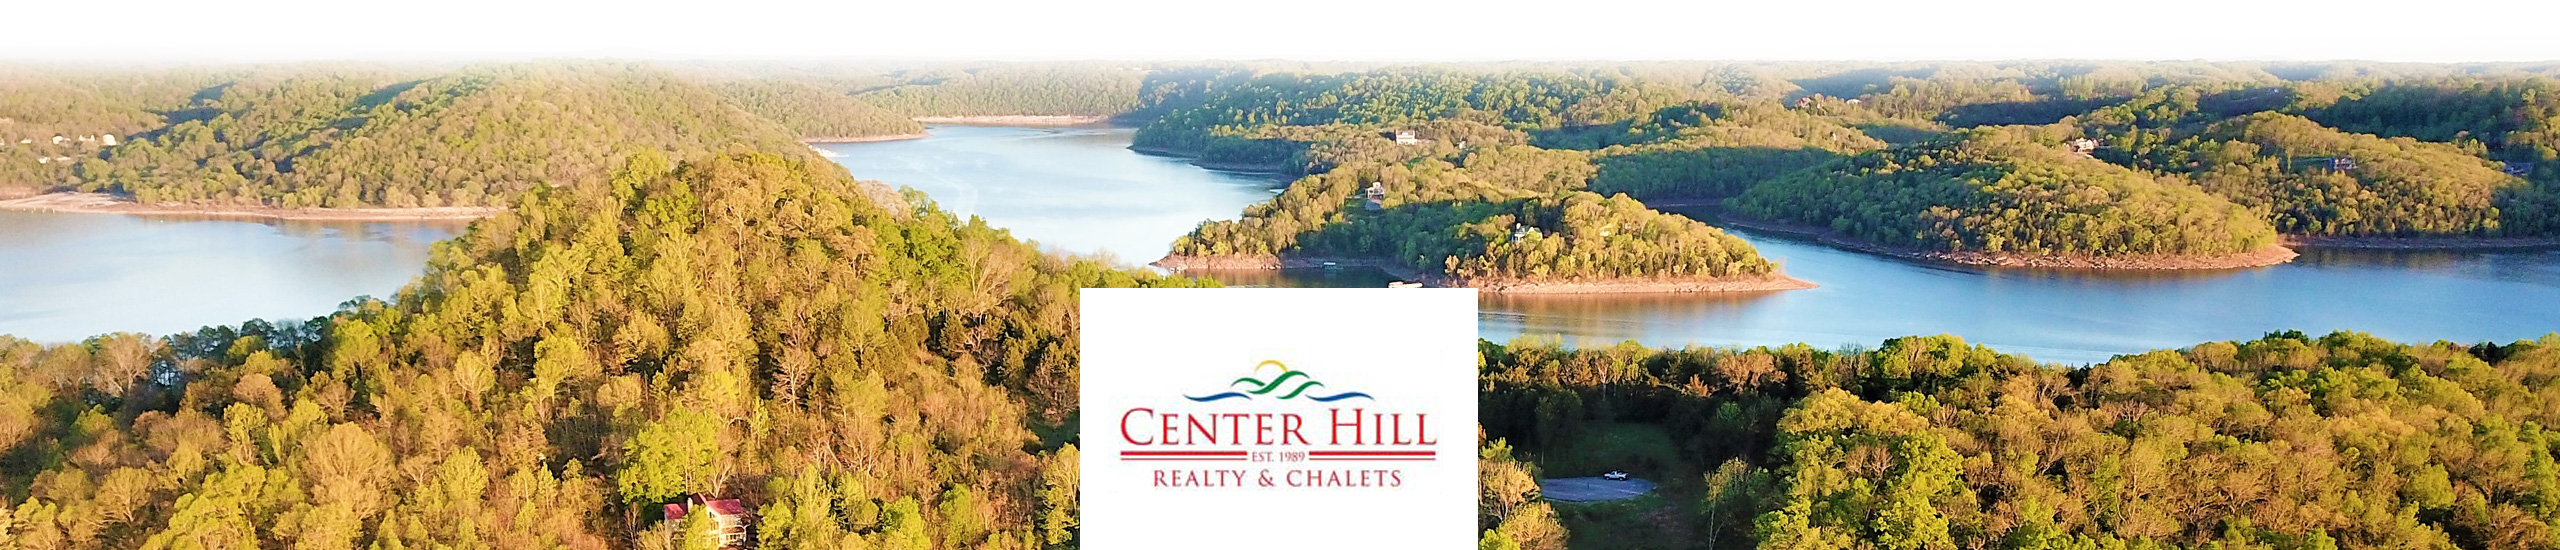 Center-Hill-Chalets-Center-Hill-Lake-Tennessee